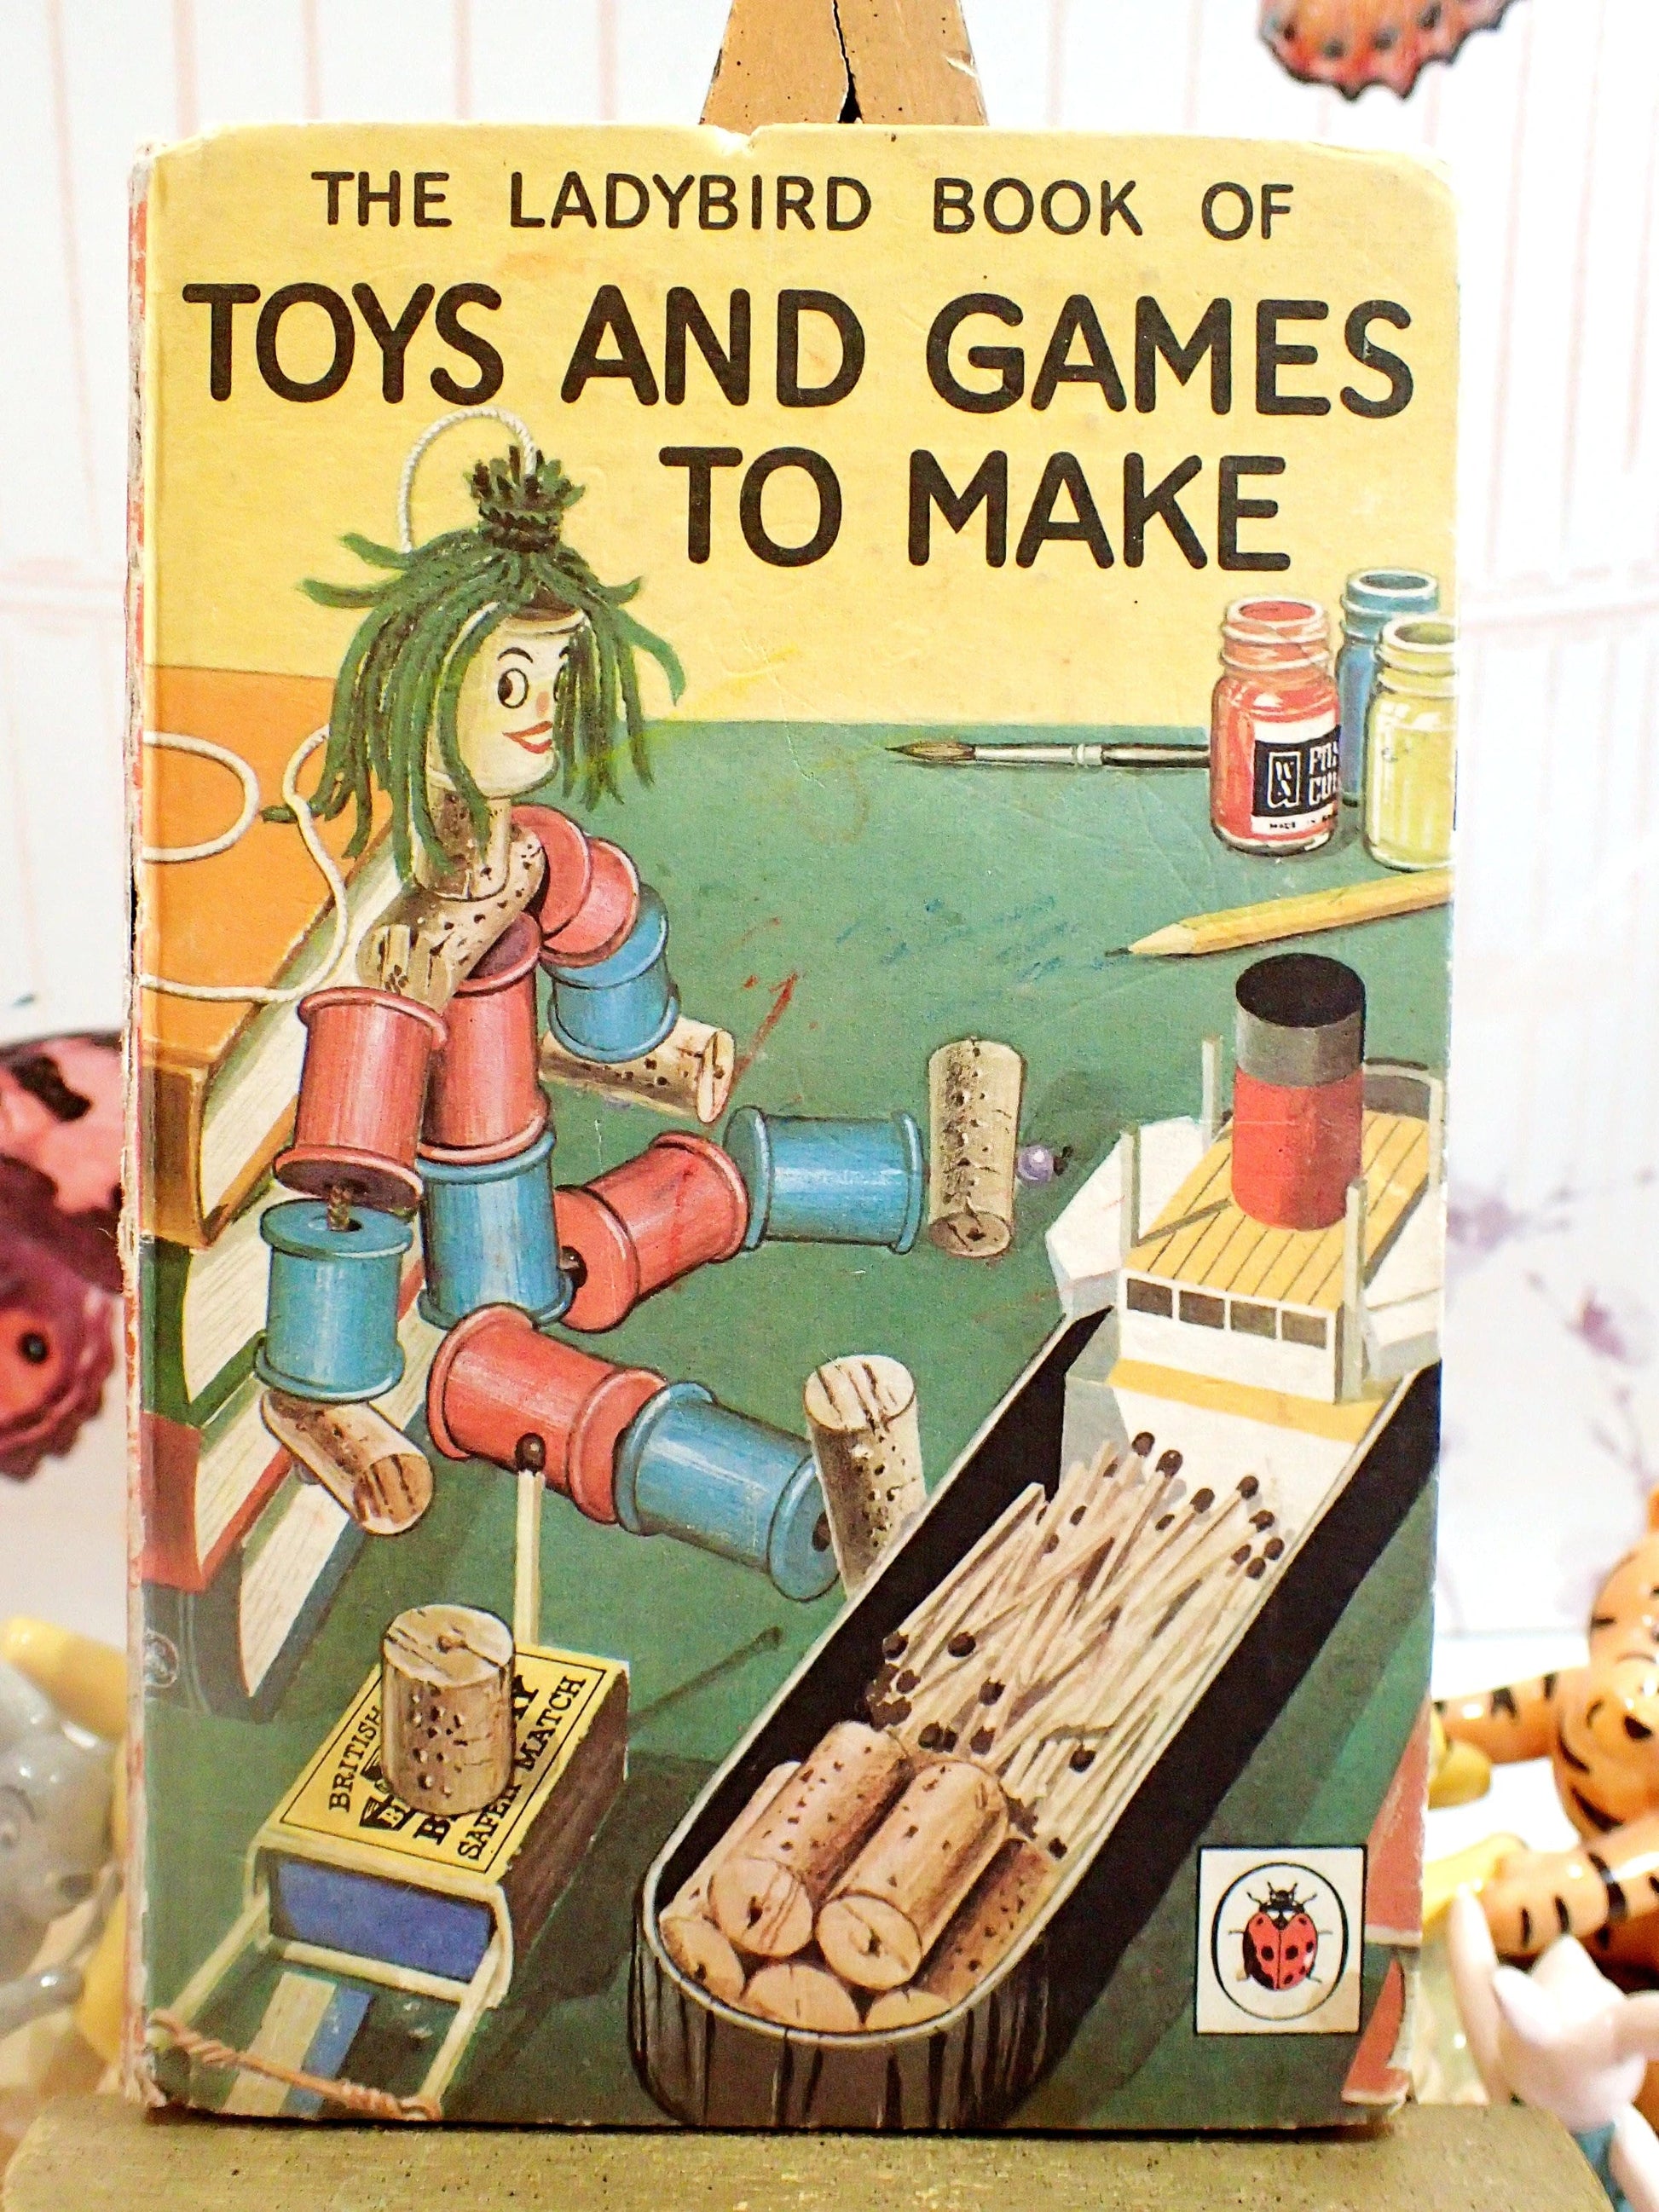 The ladybird book of toys and games to make